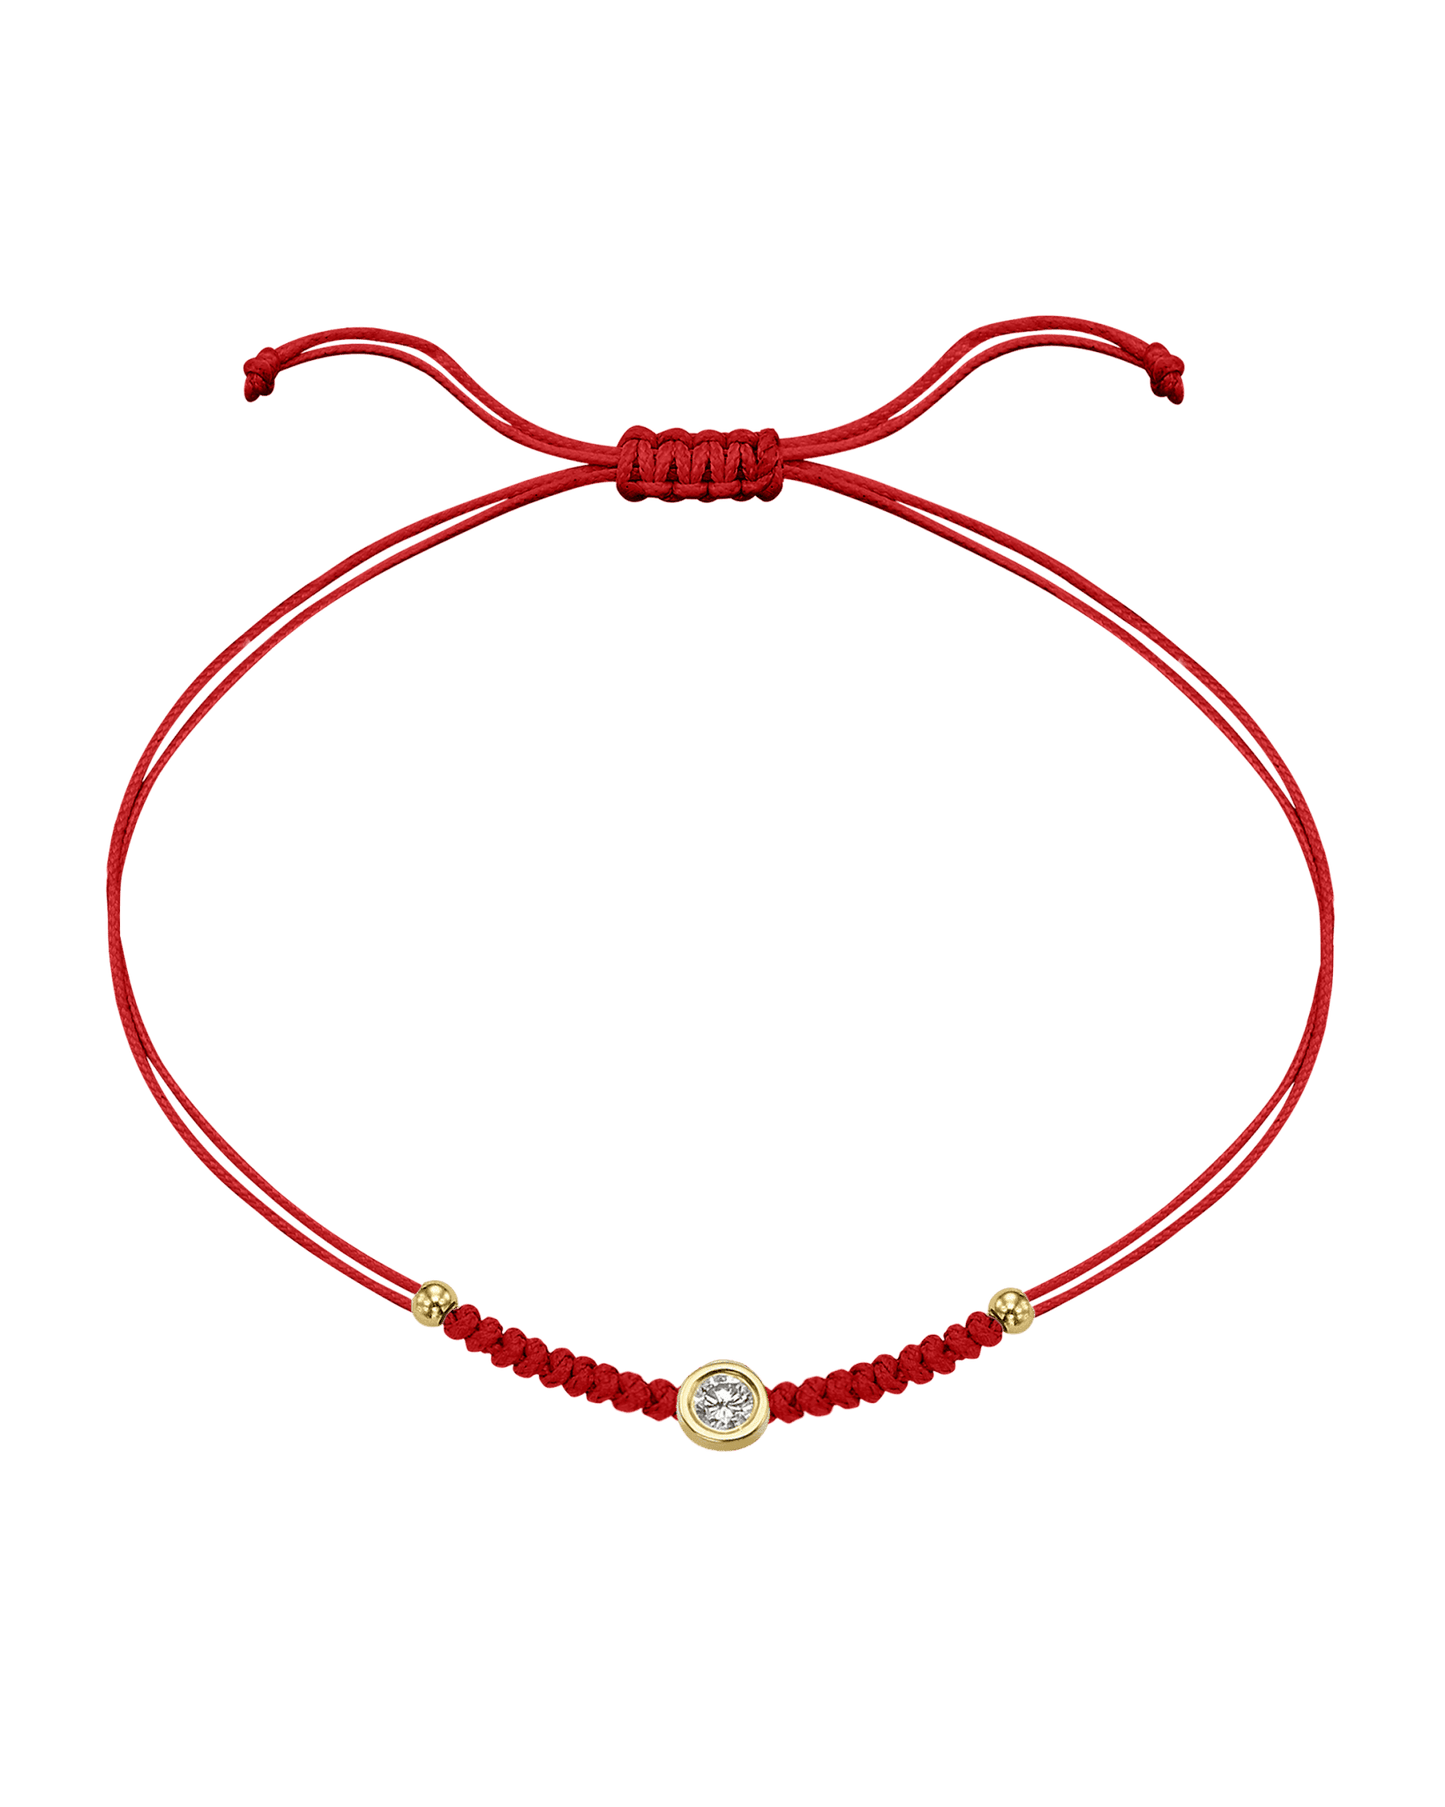 Solid Gold Sphere String of Love - 14K Yellow Gold Bracelet 14K Solid Gold Red Large: 0.1ct 